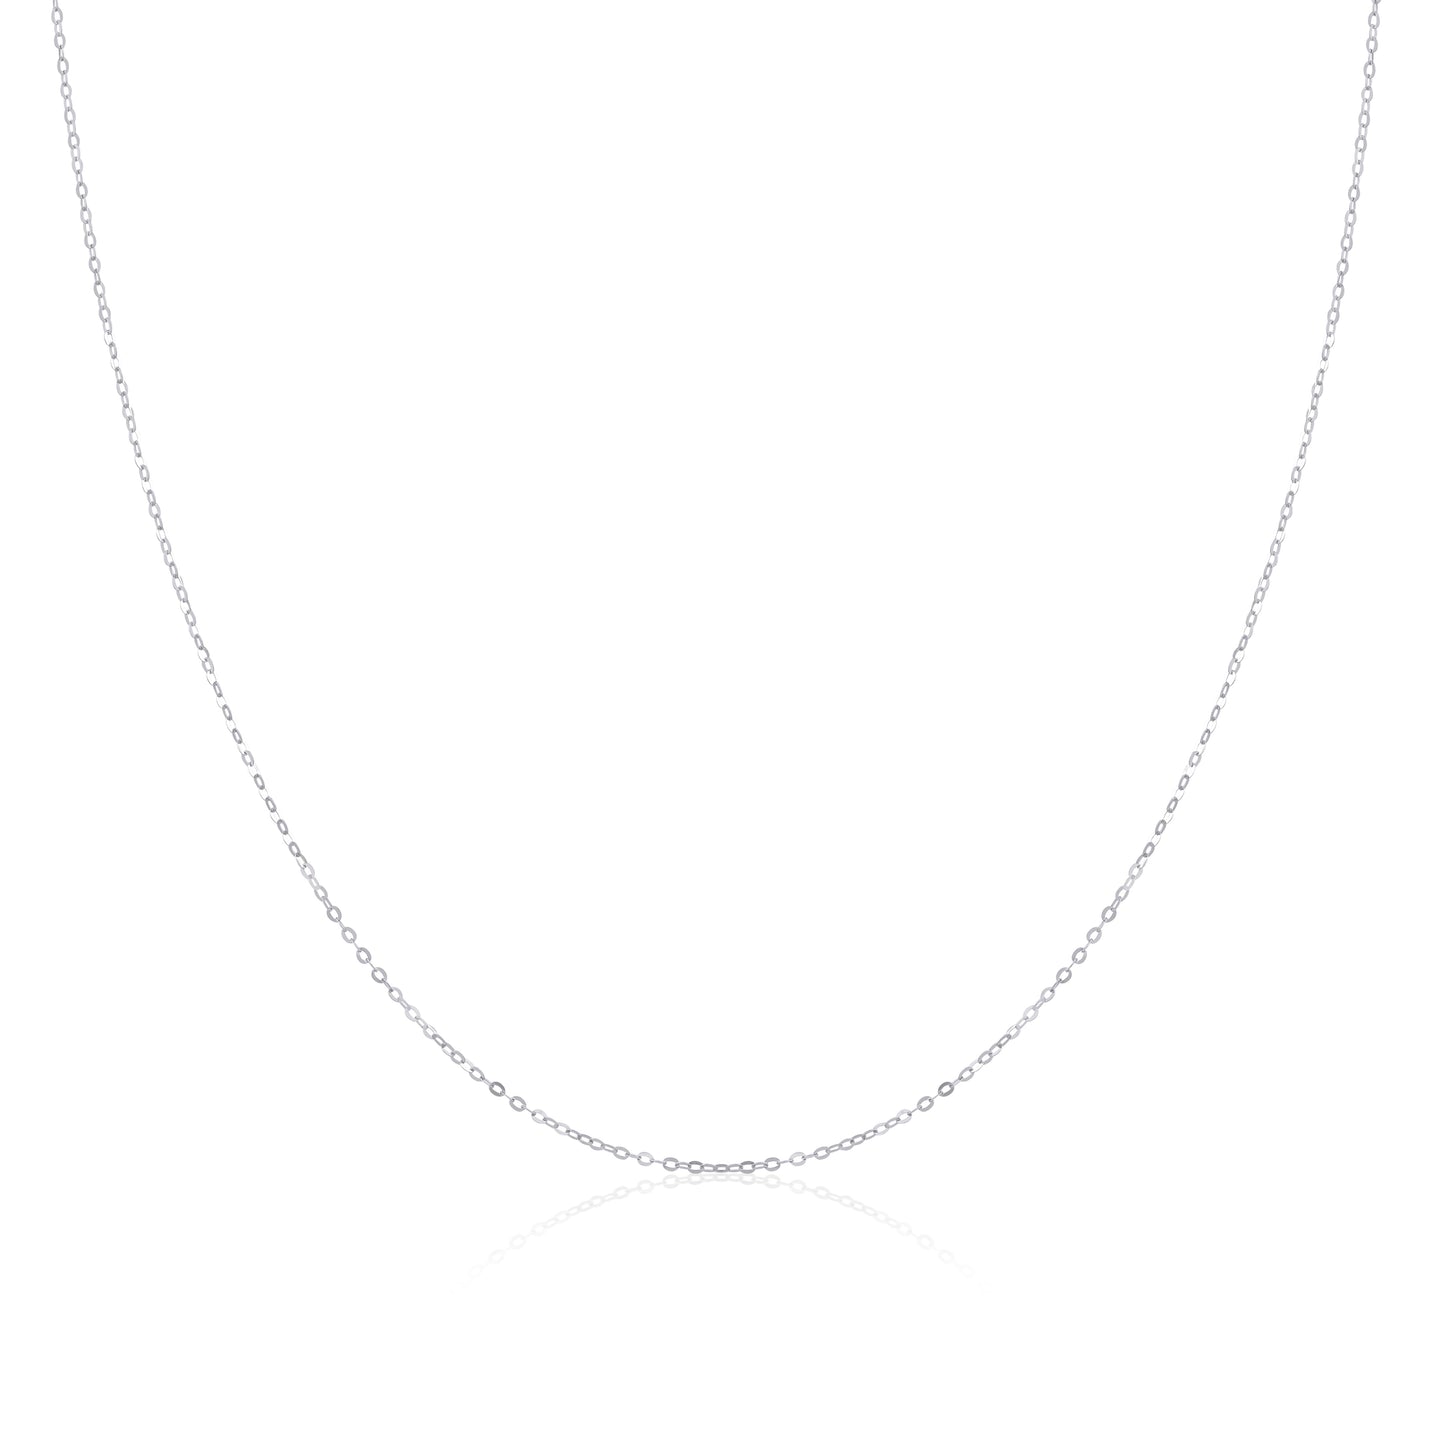 9ct White Gold Hammered Trace Chain 16 - 24 Inches